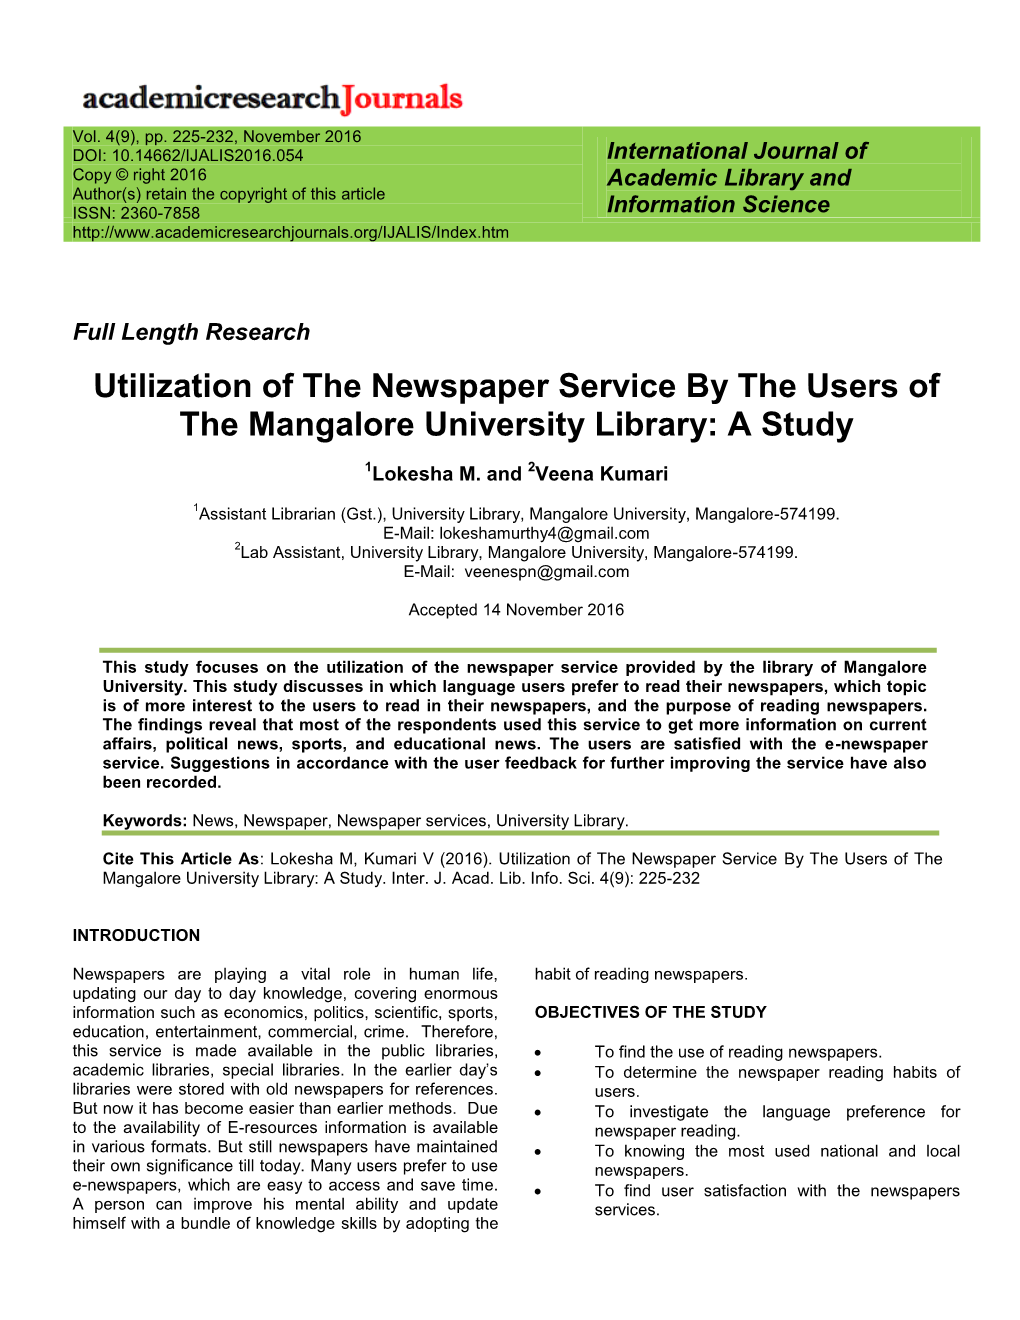 Utilization of the Newspaper Service by the Users of the Mangalore University Library: a Study